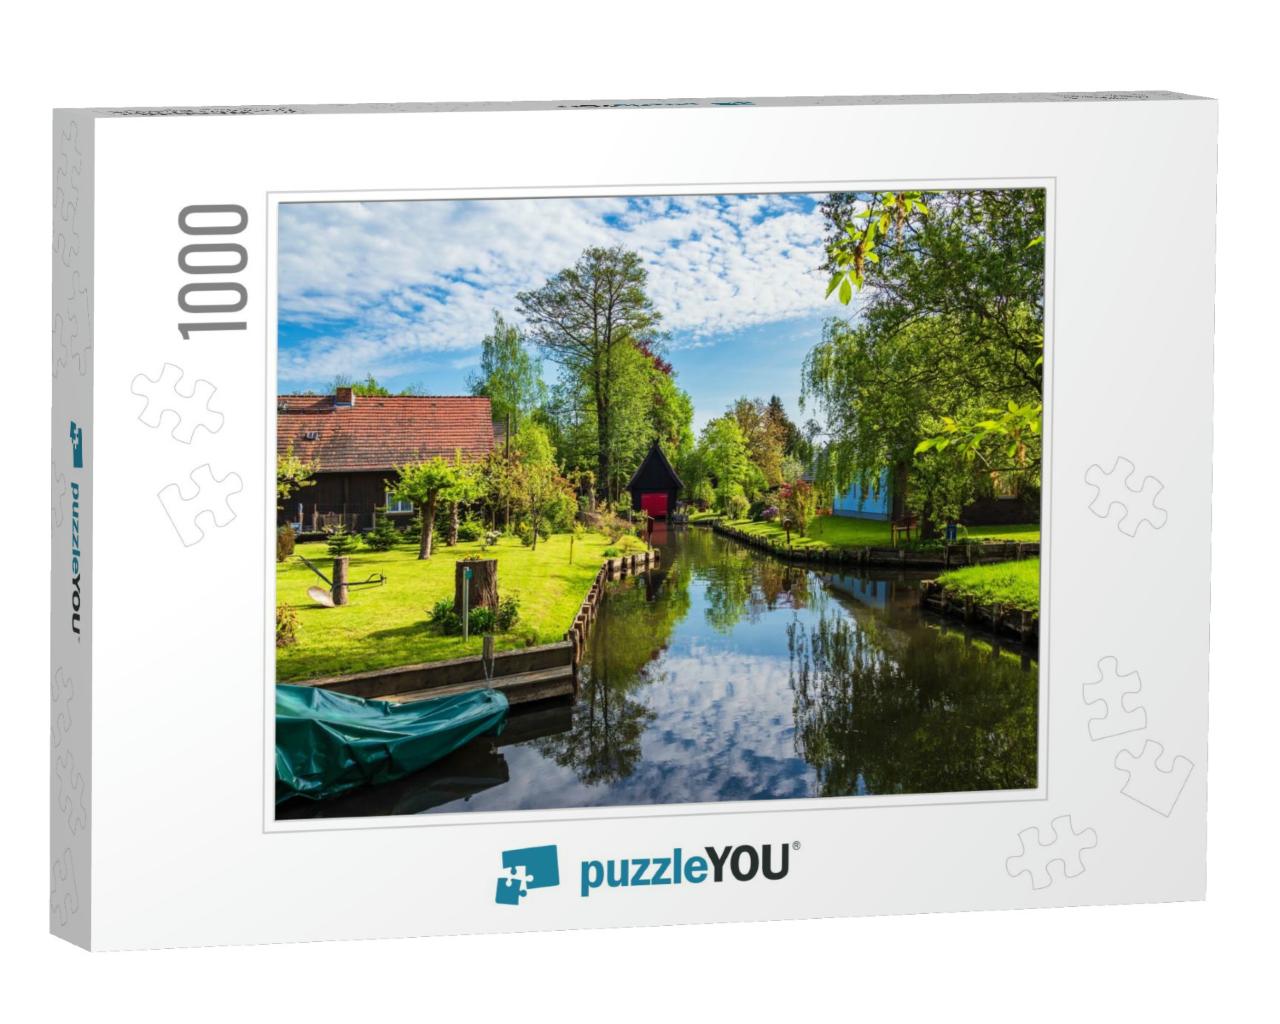 Landscape with Cottages in the Spreewald Area, Germany... Jigsaw Puzzle with 1000 pieces